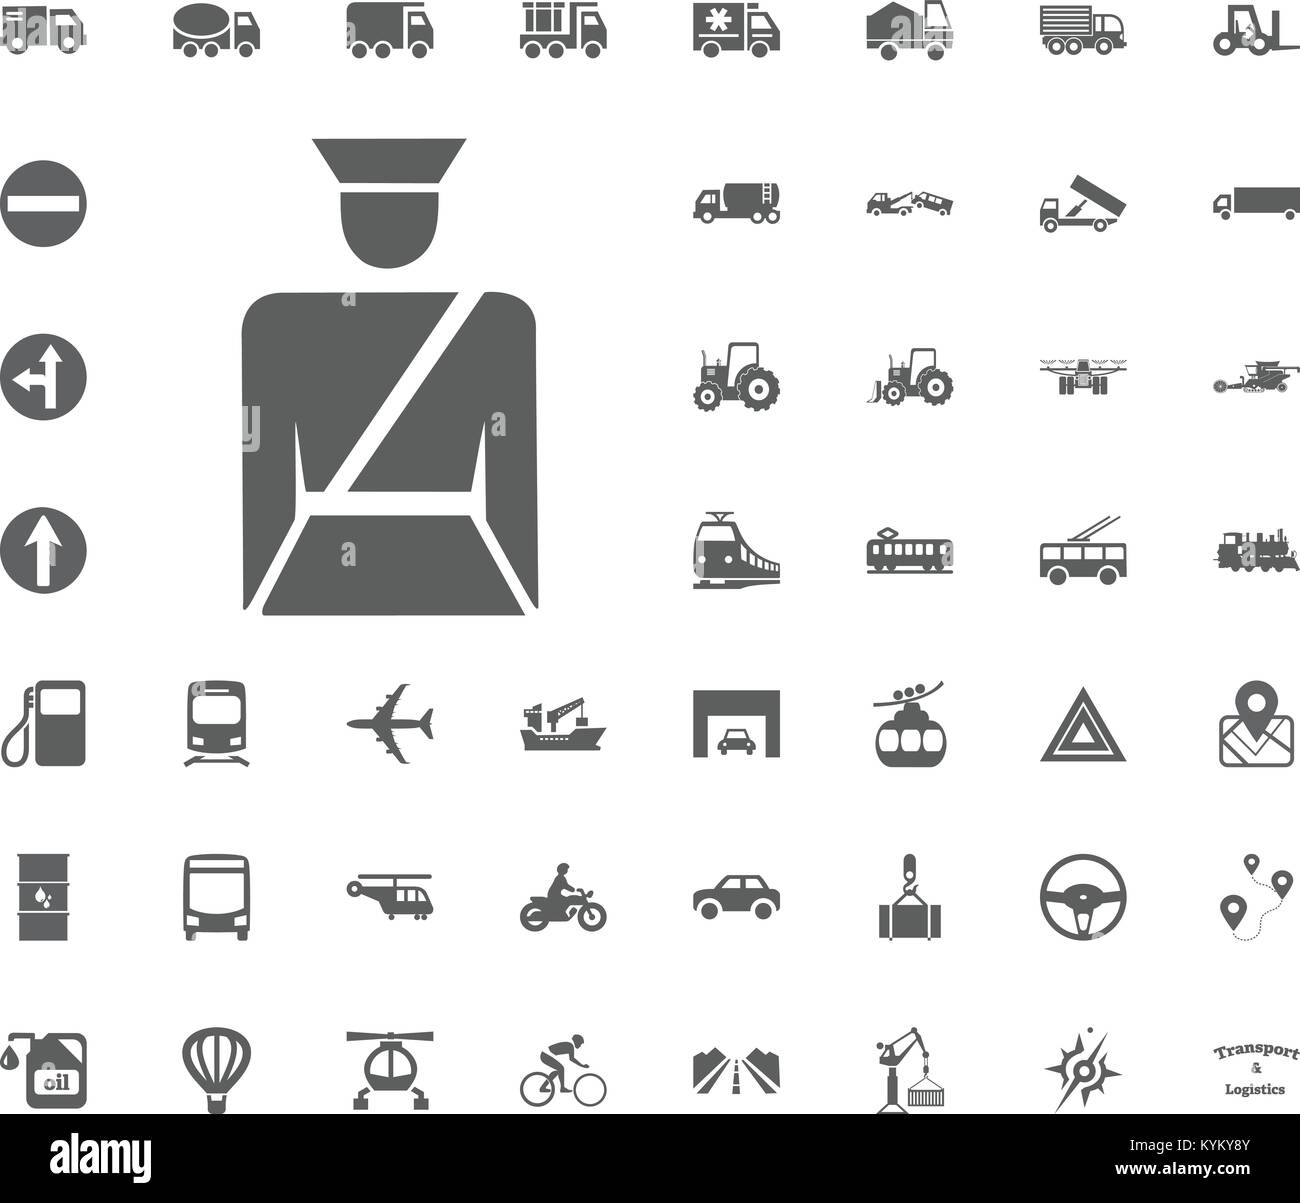 Police inspector icon. Transport and Logistics set icons. Transportation set icons. Stock Vector